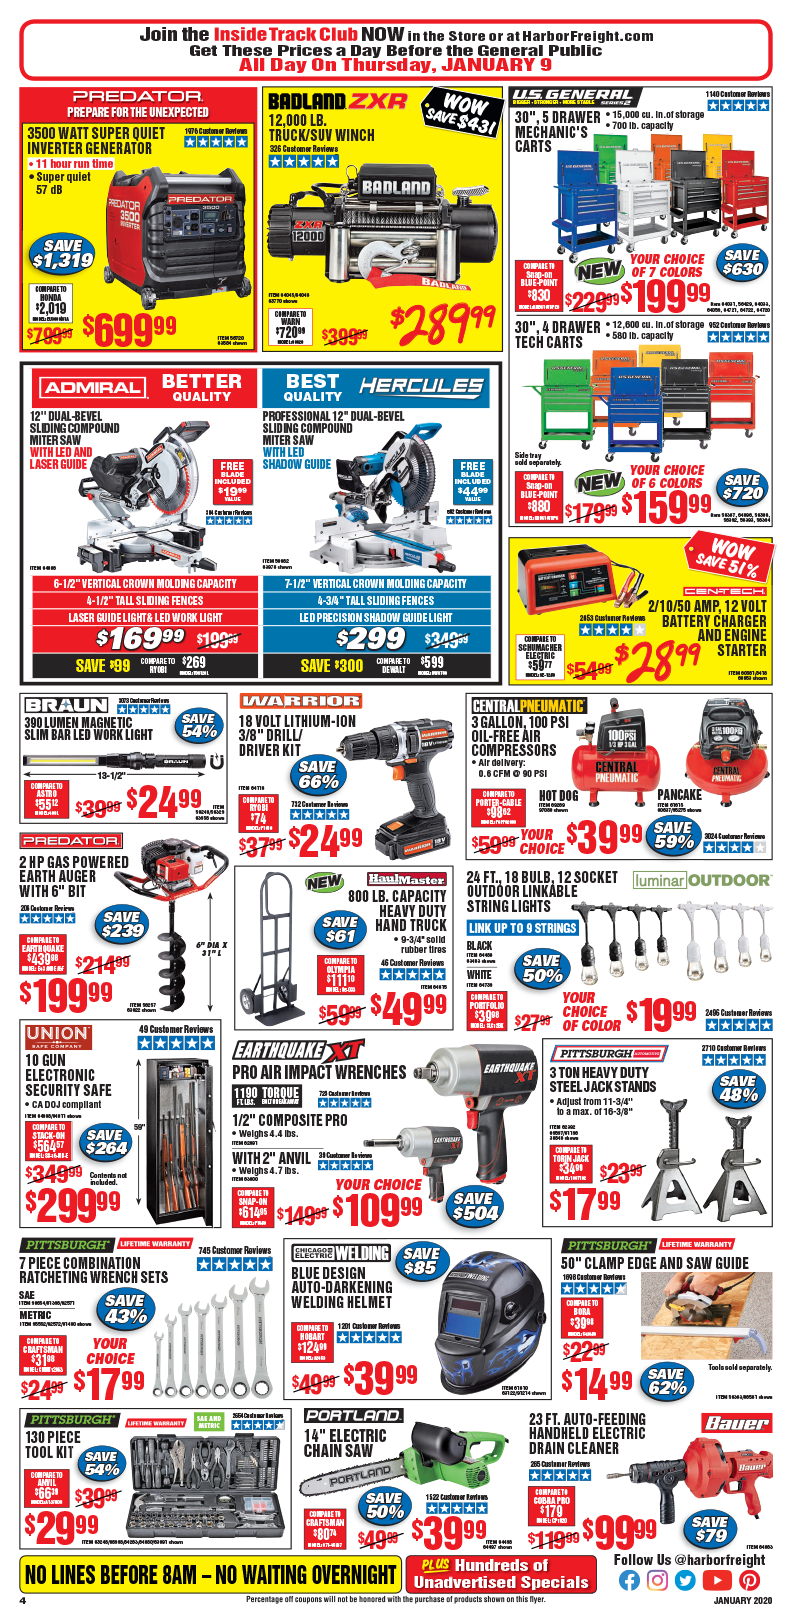 January Parking Lot Sale Harbor Freight Coupons